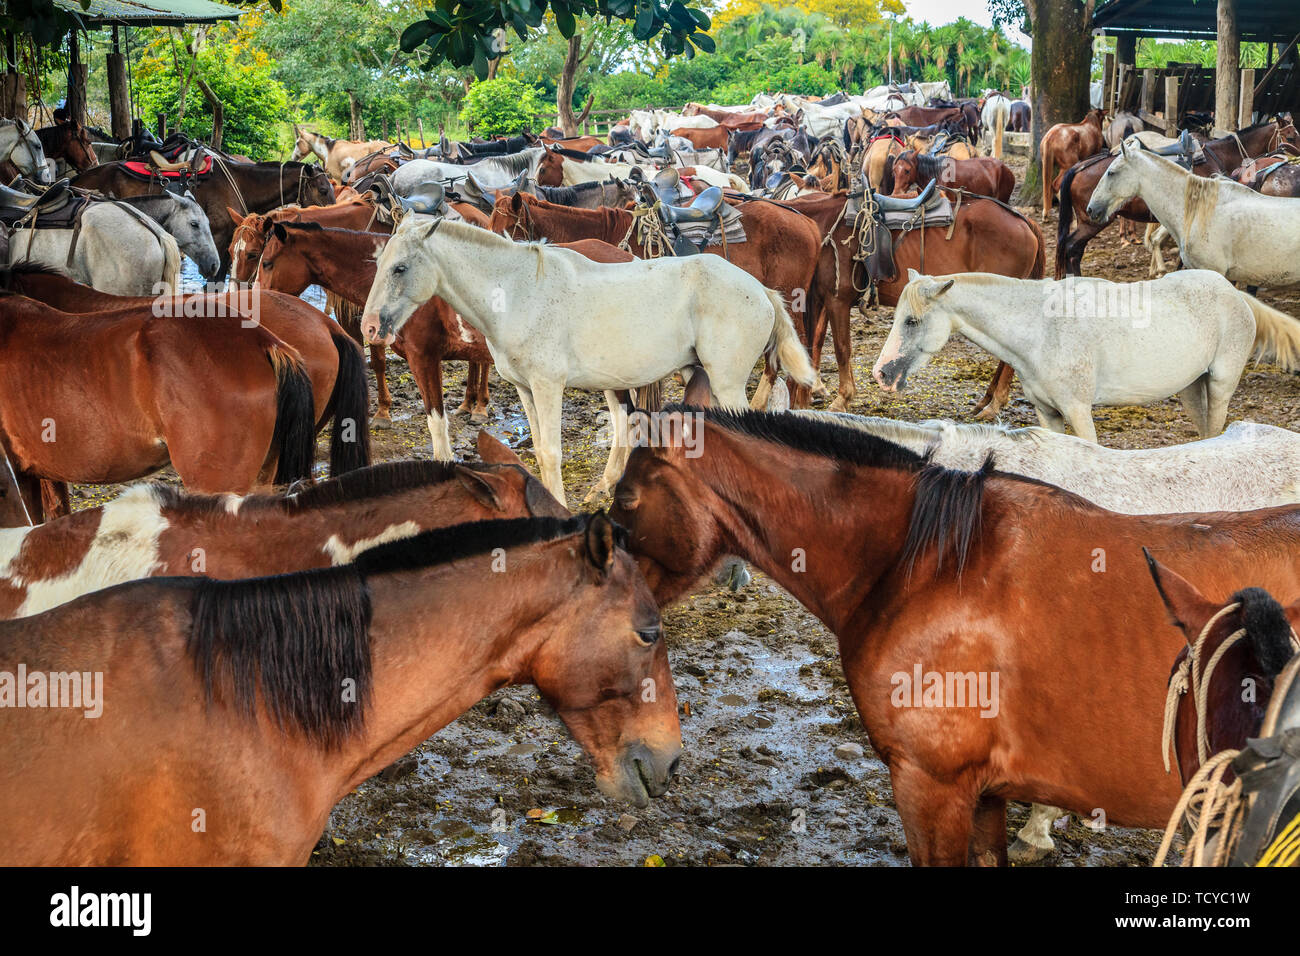 Large group of mules in a farm in Guanacaste province in Costa Rica Stock Photo